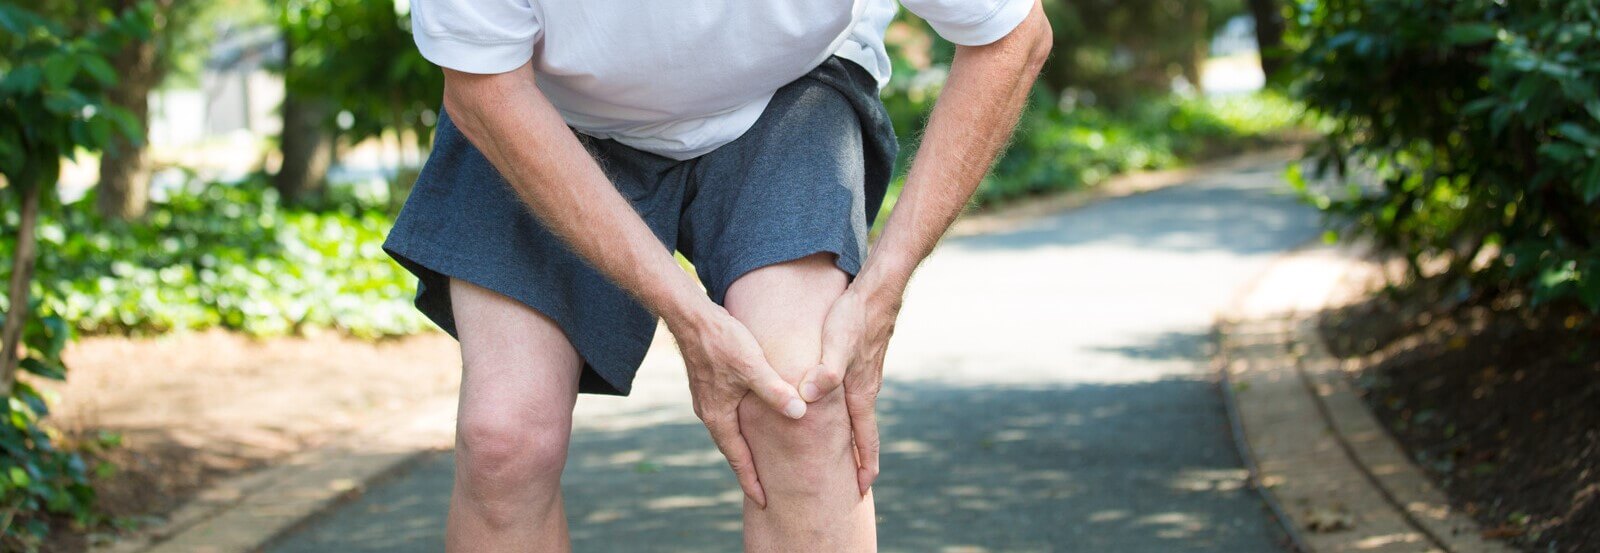 A man with MCL and LCL knee pain holding his knee